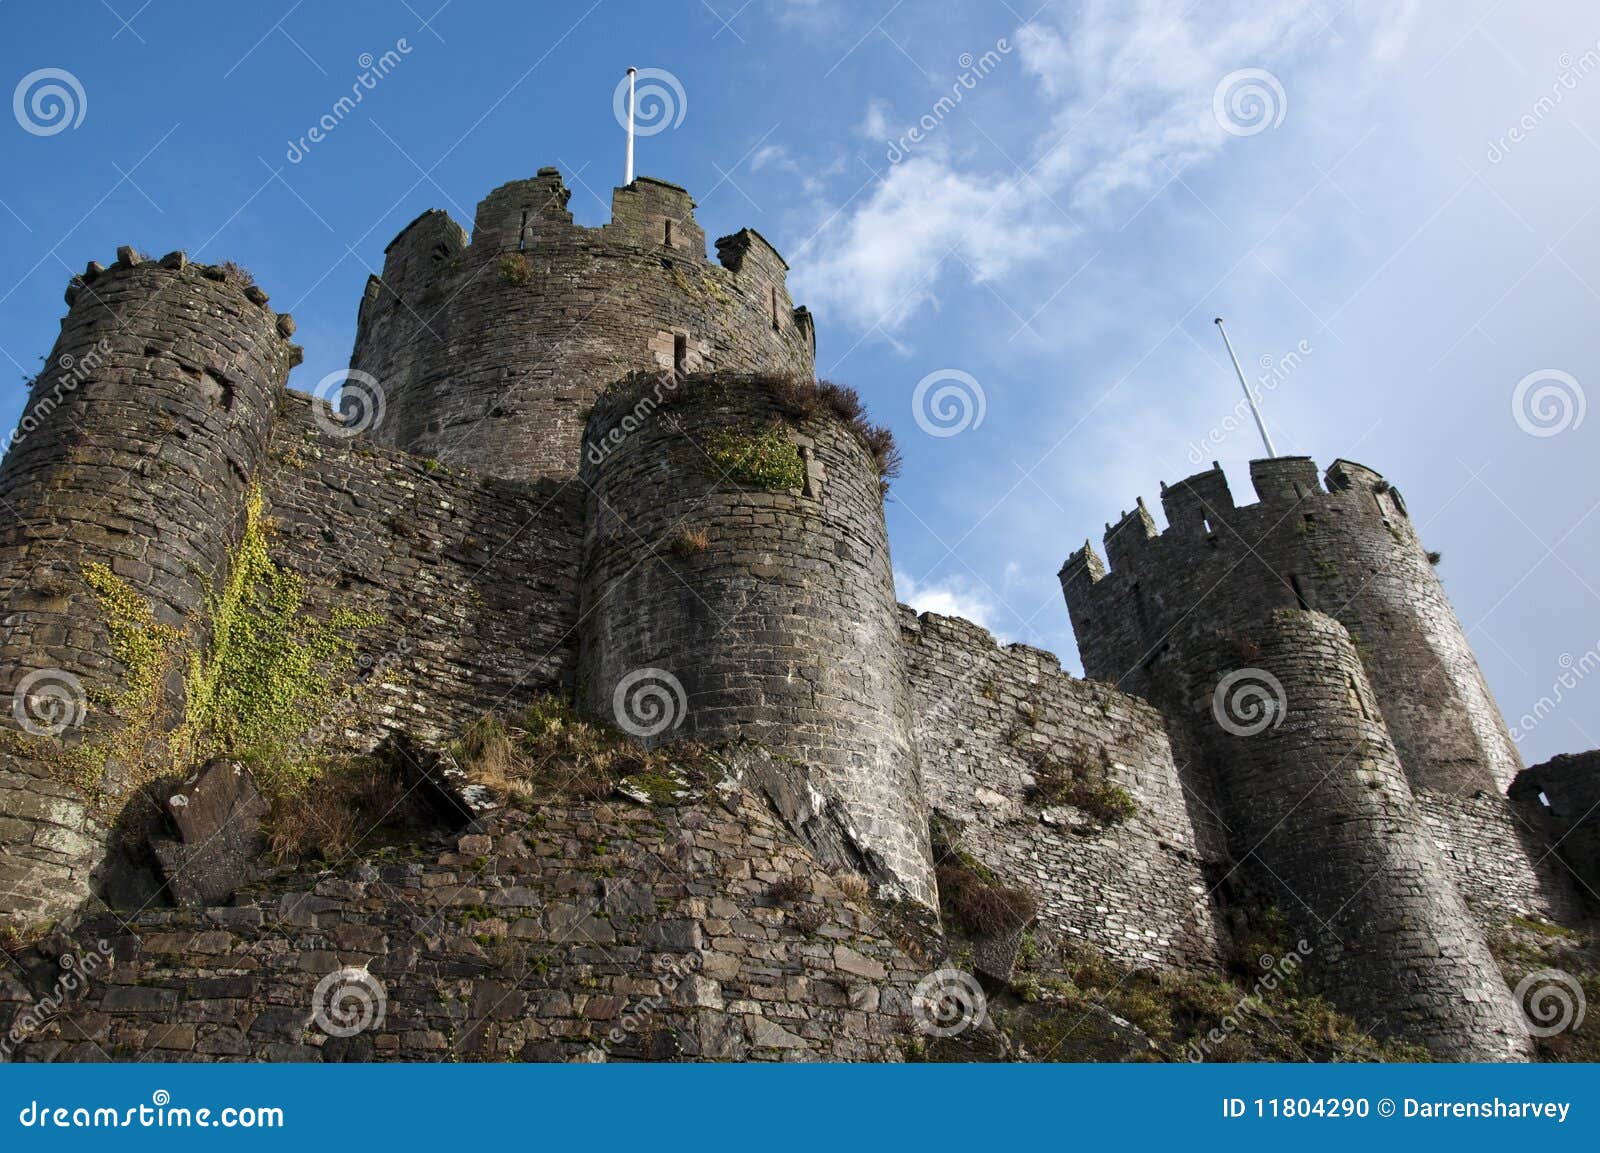 conwy castle in wales